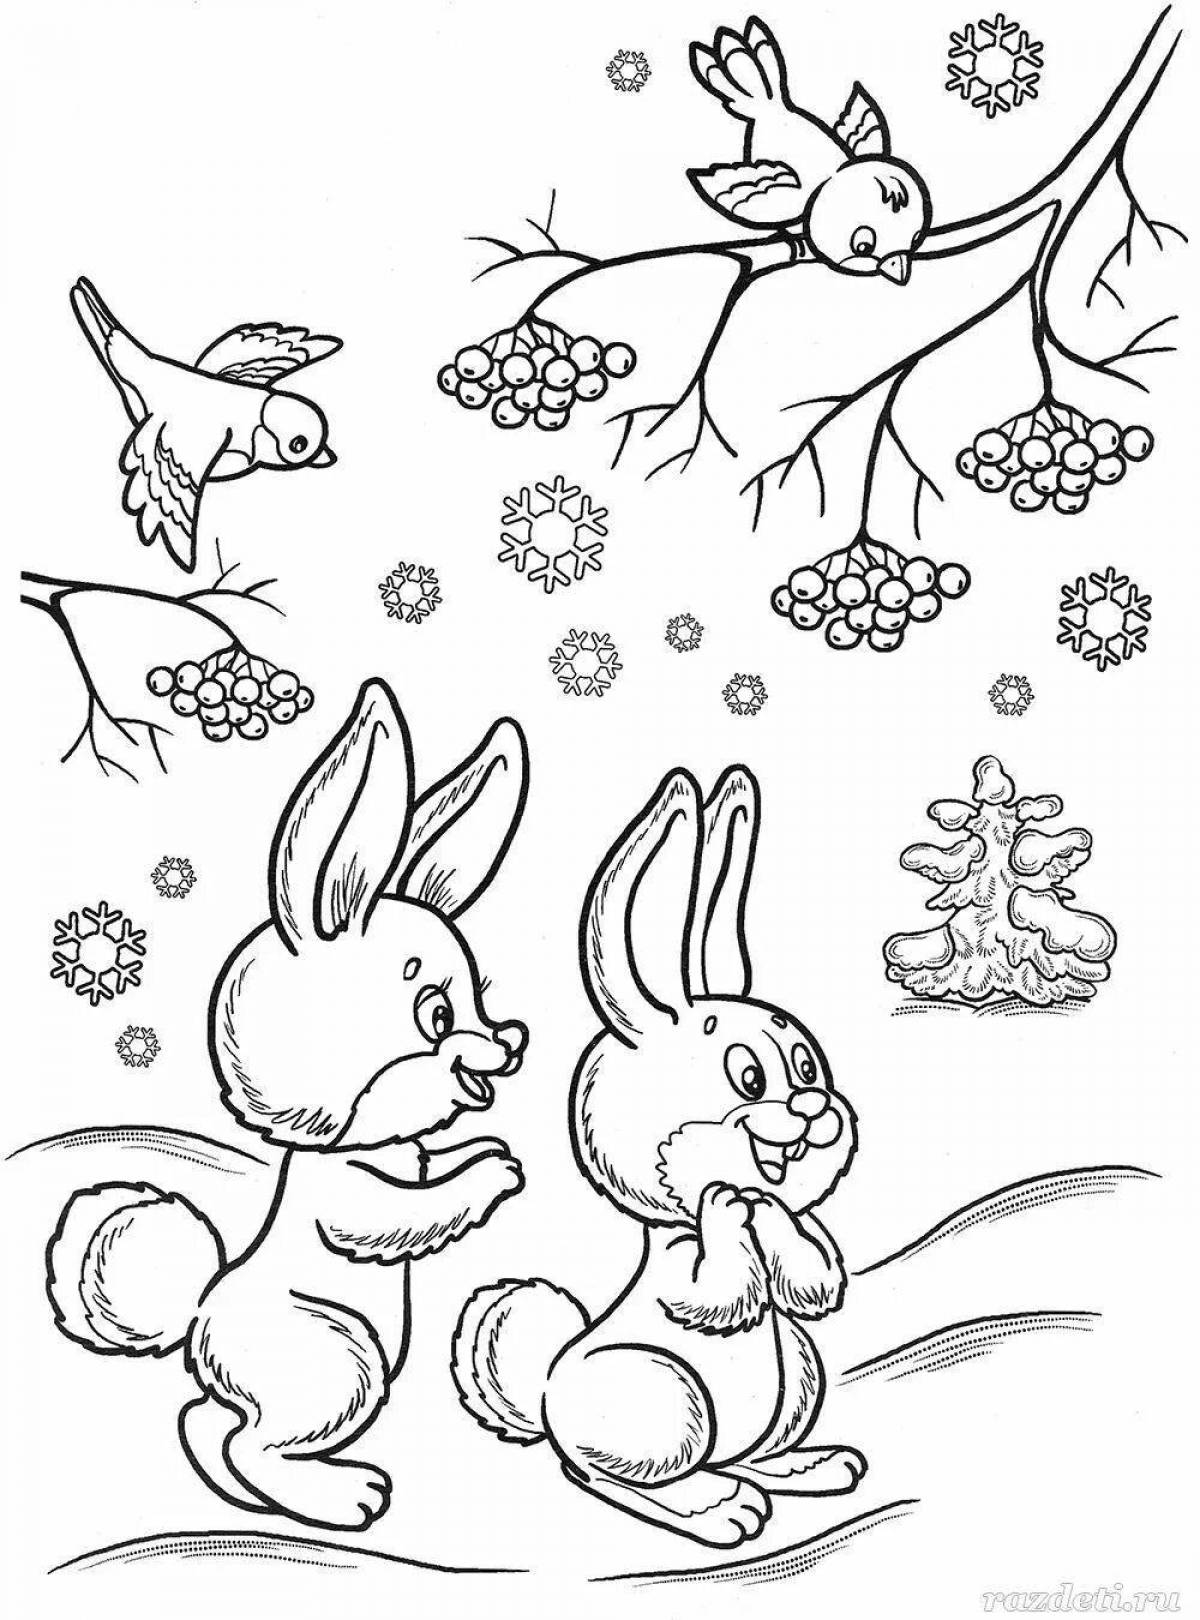 Glorious hare Christmas coloring